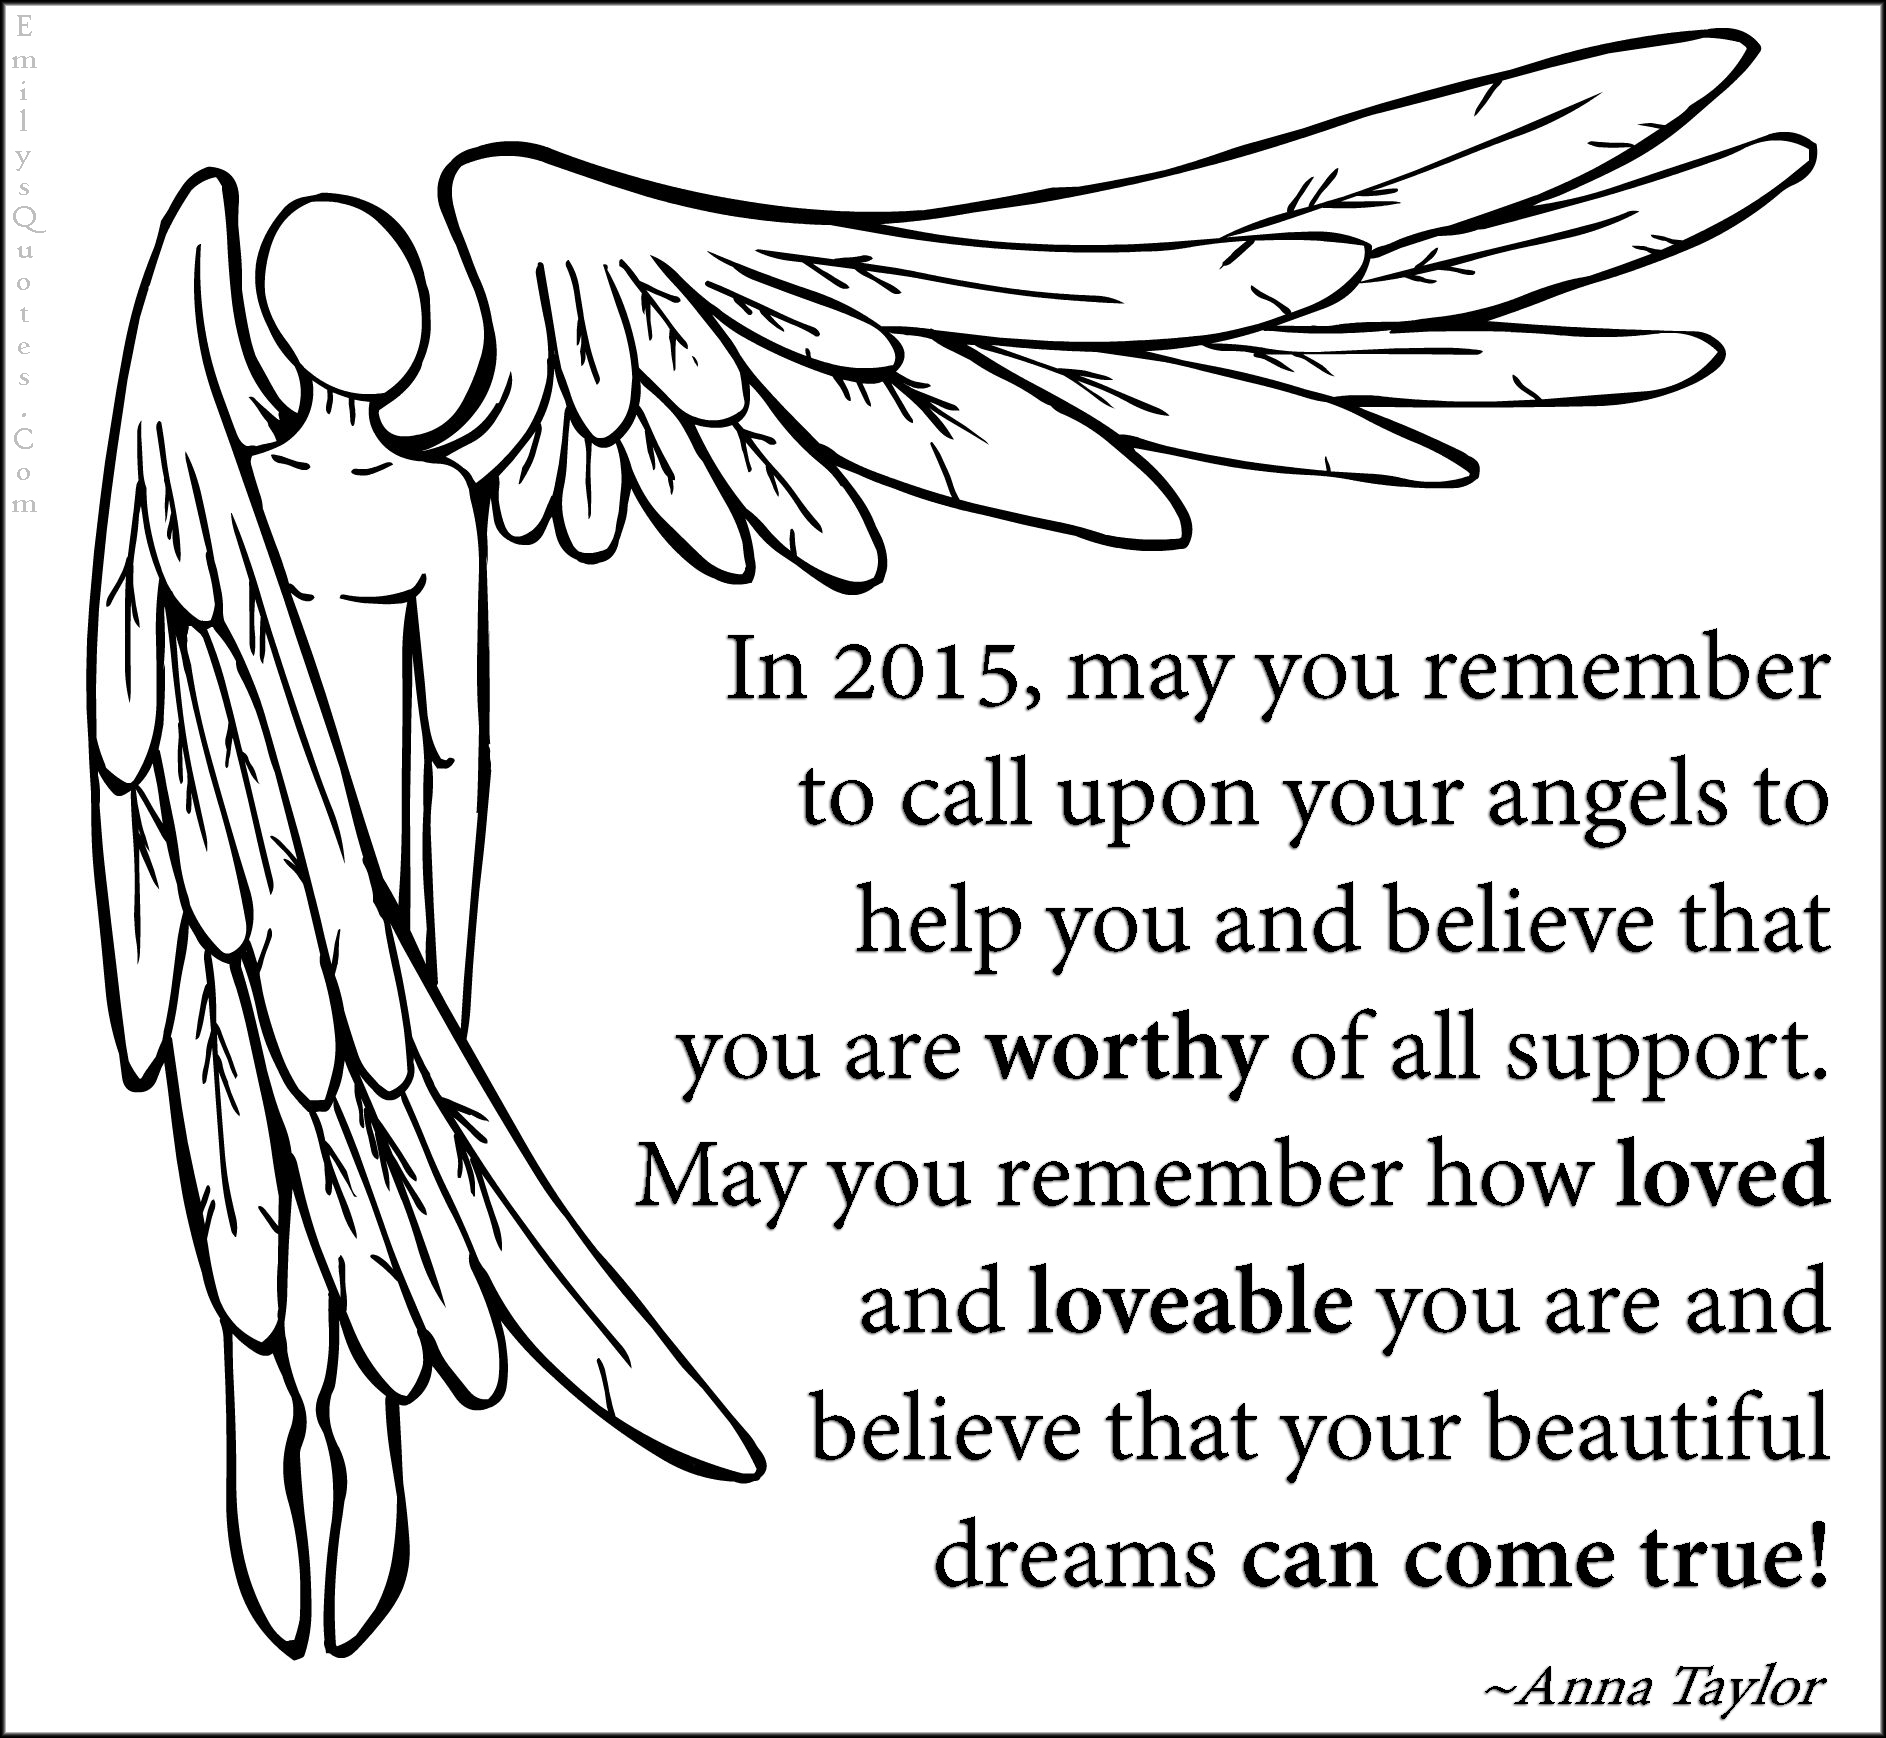 In 2015, may you remember to call upon your angels to help you and believe that you are worthy of all support. May you remember how loved and loveable you are and believe that your beautiful dreams can come true!